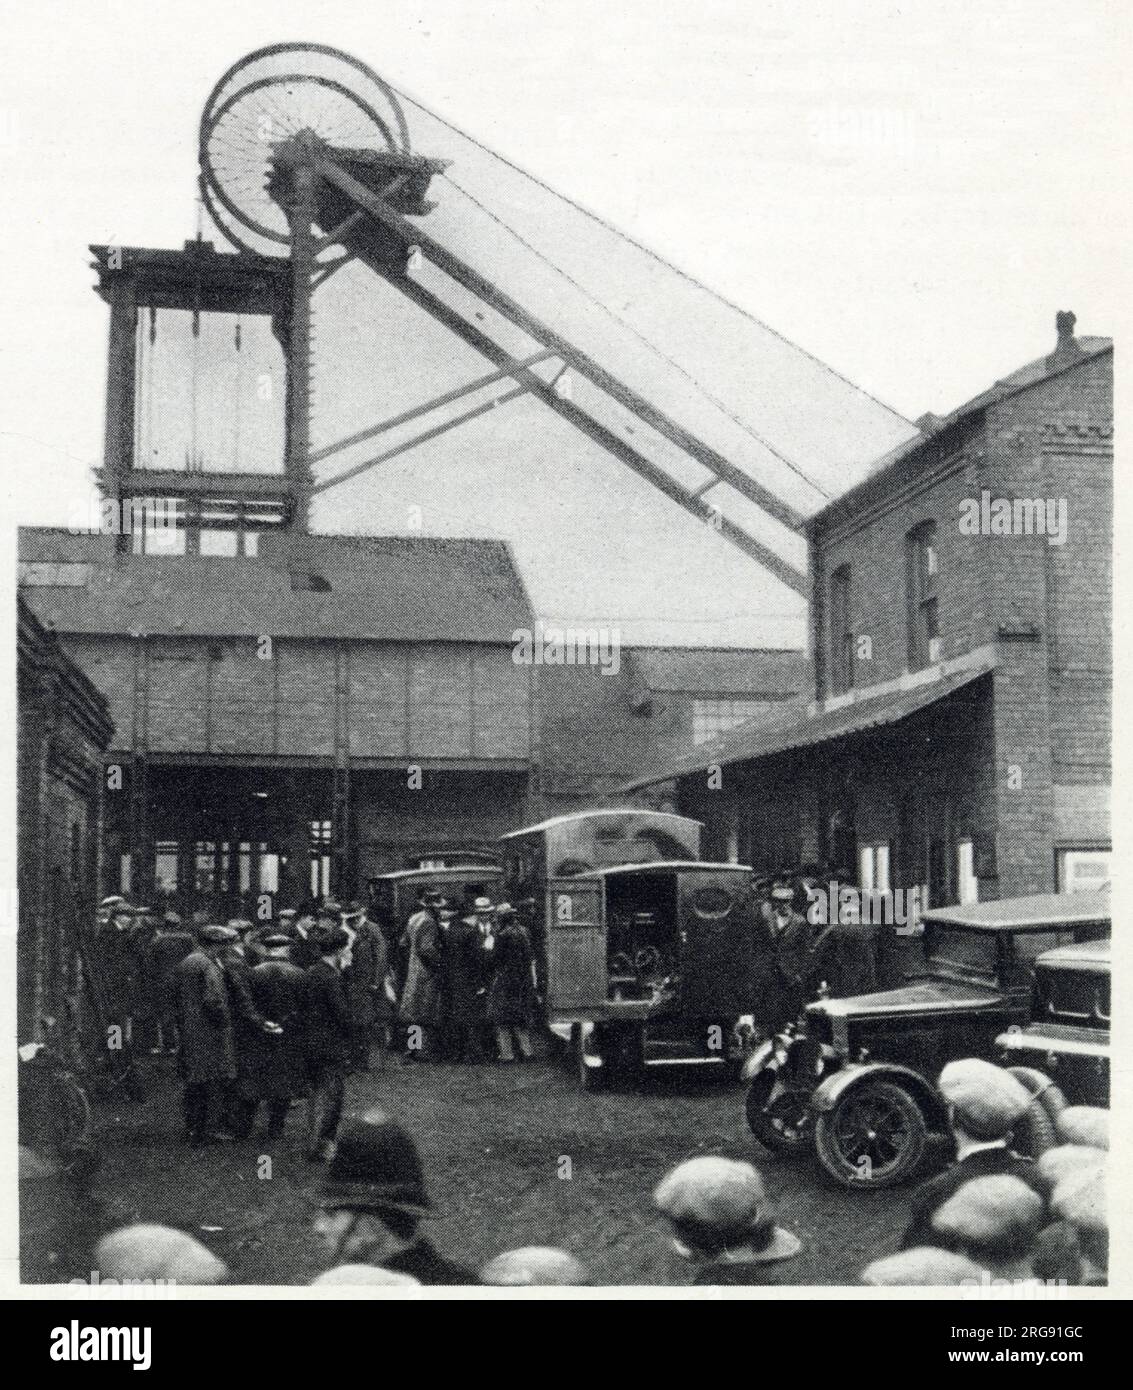 Bickershaw Colliery in Lancashire where coal-mine disaster happened on the 10 October 1932. A mine-shaft elevator carrying 20 people fell at the mine, killing all but one person. Scene at the pit-head after the explosion in the mine, group of anxious people, with ambulance-van in readiness. Stock Photo